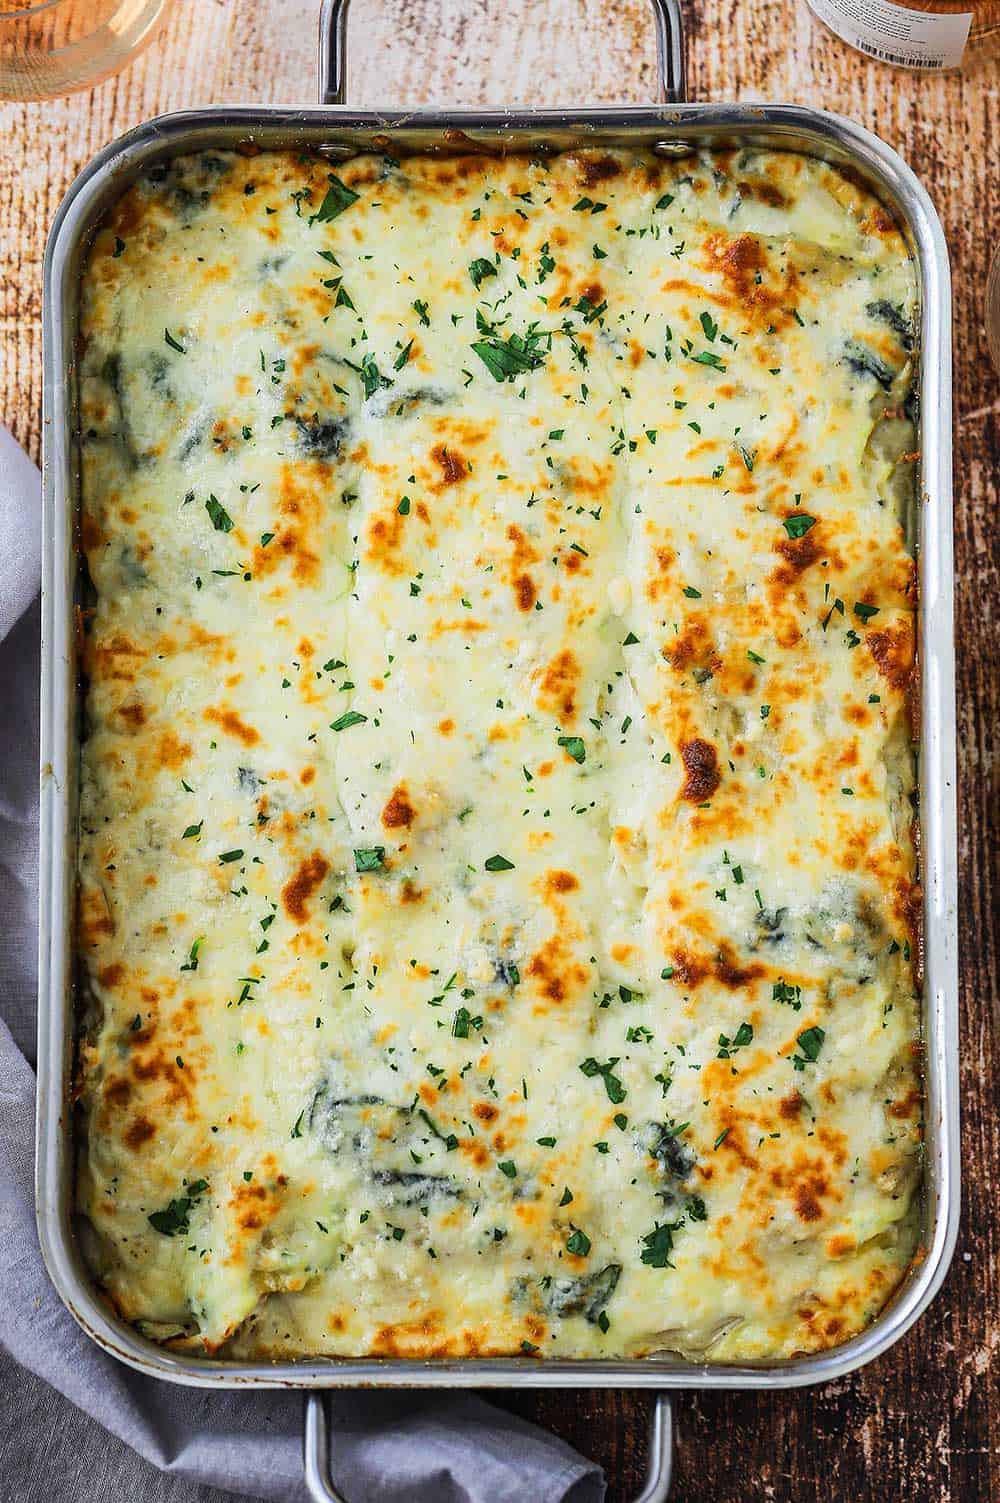 An overhead view of white chicken lasagna with spinach that has been fully cooked and lightly browned on top.